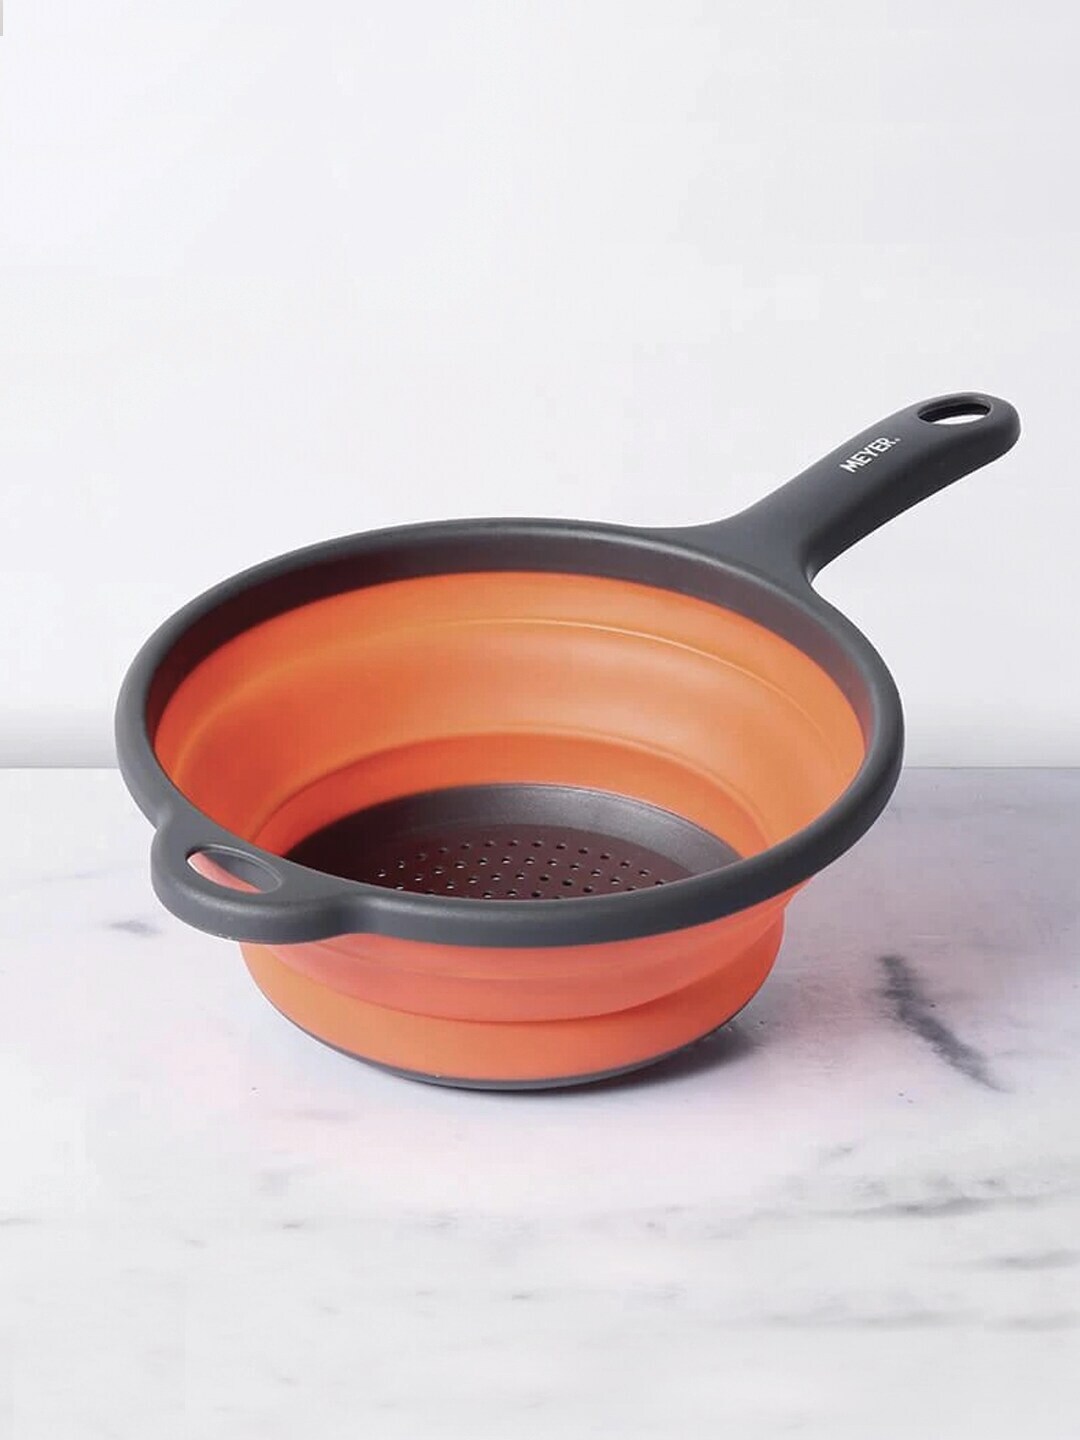 MEYER Orange & Black Collapsible Vegetable & Fruit Colander Strainers With Single Handle Price in India